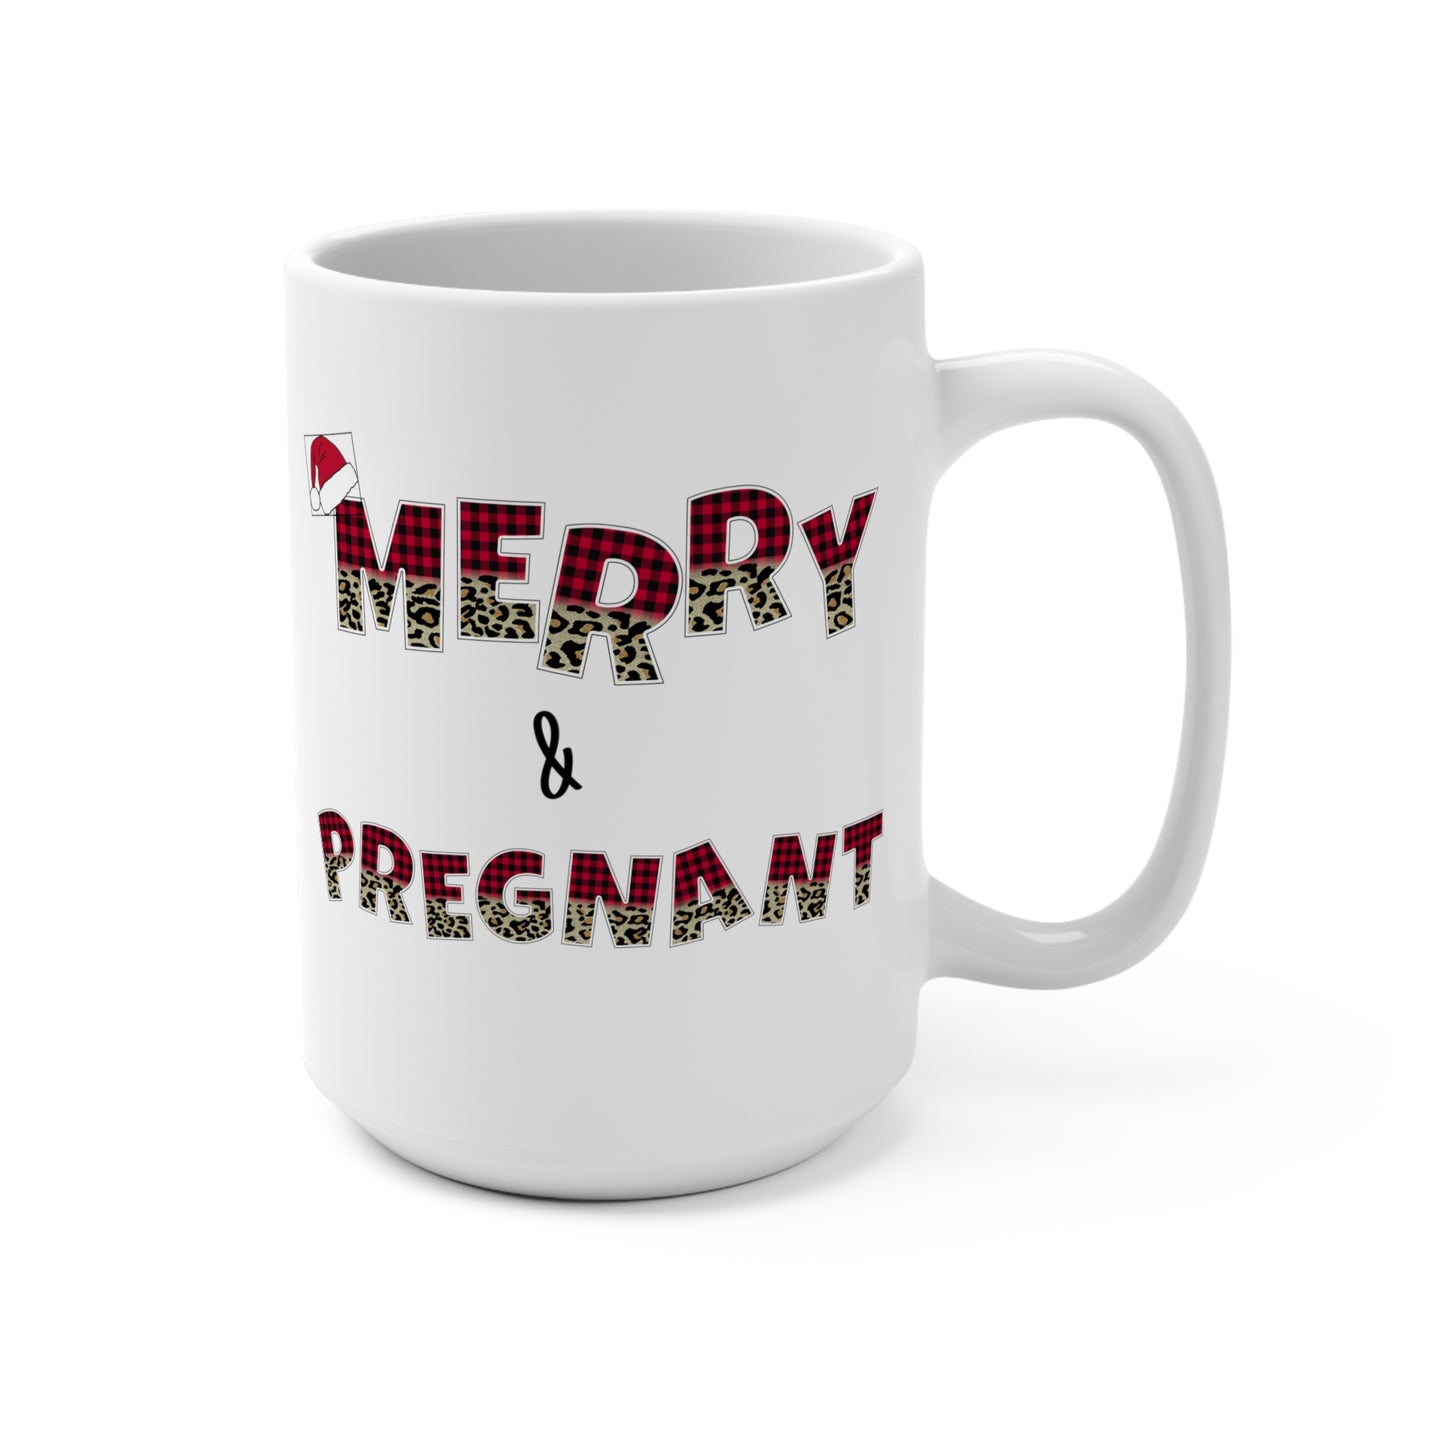 Expecting Mom Gift, Expecting Parents Christmas Mug, New Pregnancy Gift for Mom, Expecting Mother Gift, Merry and Pregnant Pregnancy Announcement